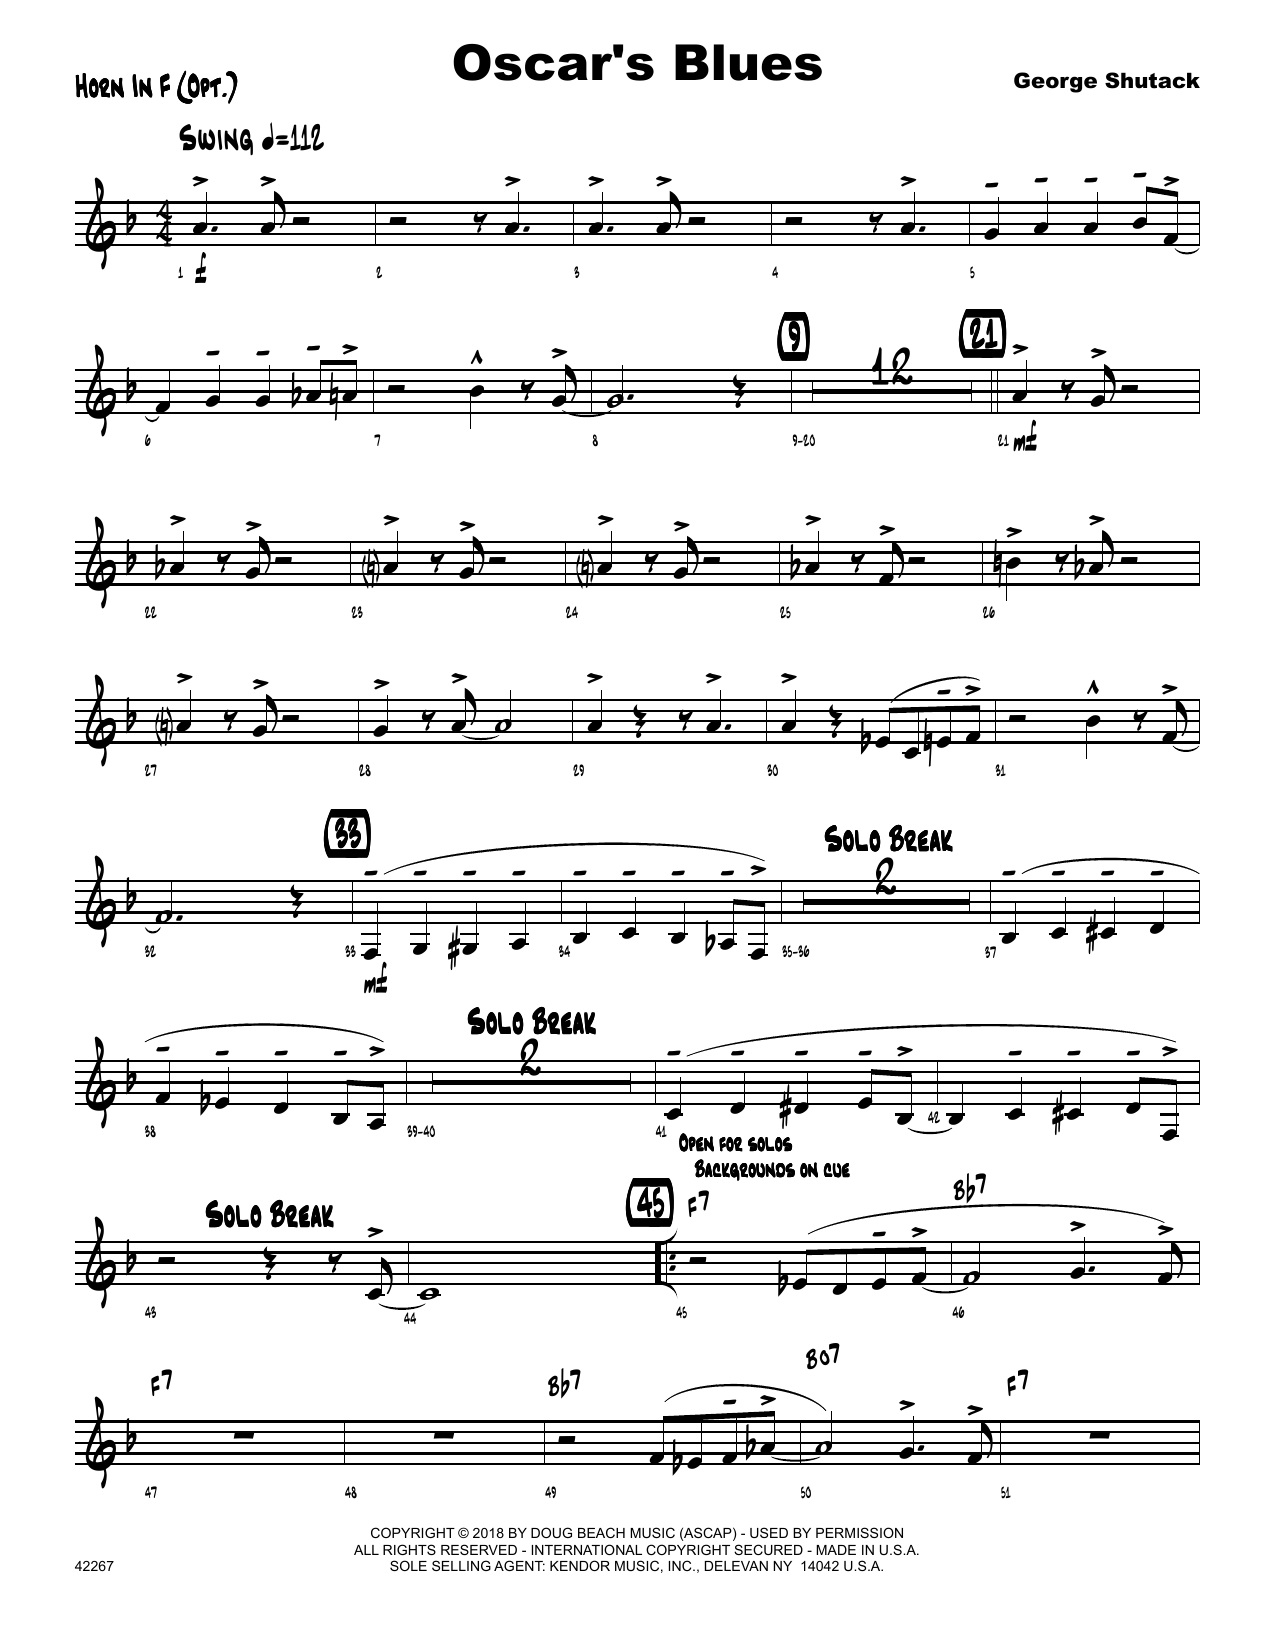 George Shutack Oscar's Blues - Horn in F sheet music preview music notes and score for Jazz Ensemble including 2 page(s)